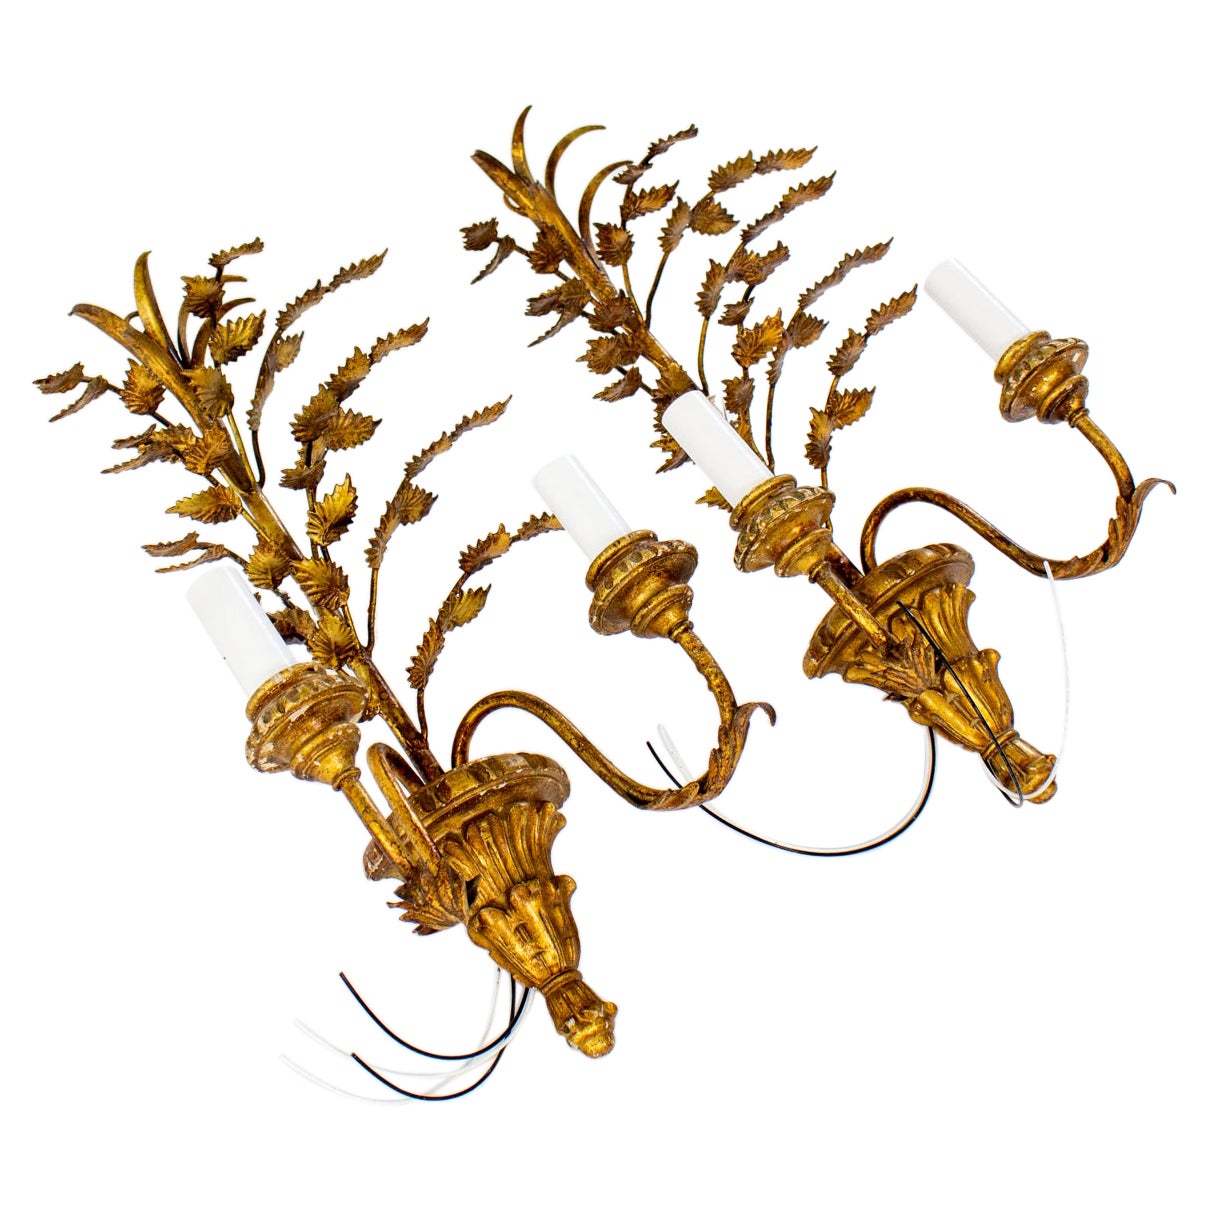 Mid 20th Century Italian Gilt Wood and Metal Leaf Sconces - a Pair For Sale